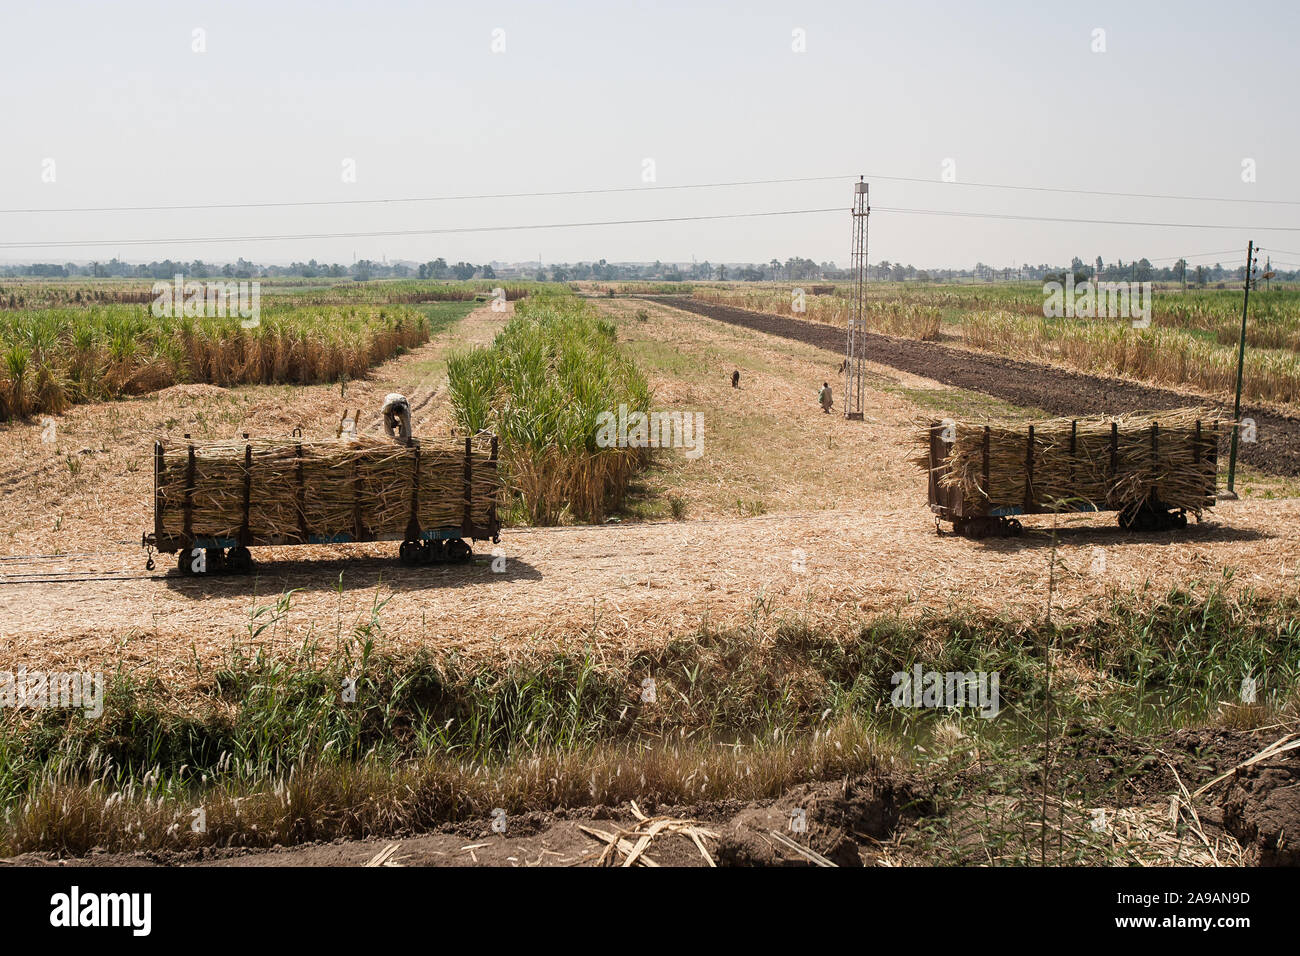 Qena, Egypt, April 28, 2008: Carts of sugarcane wait to be transported in sugar cane plantations in Qena, Egypt. Stock Photo